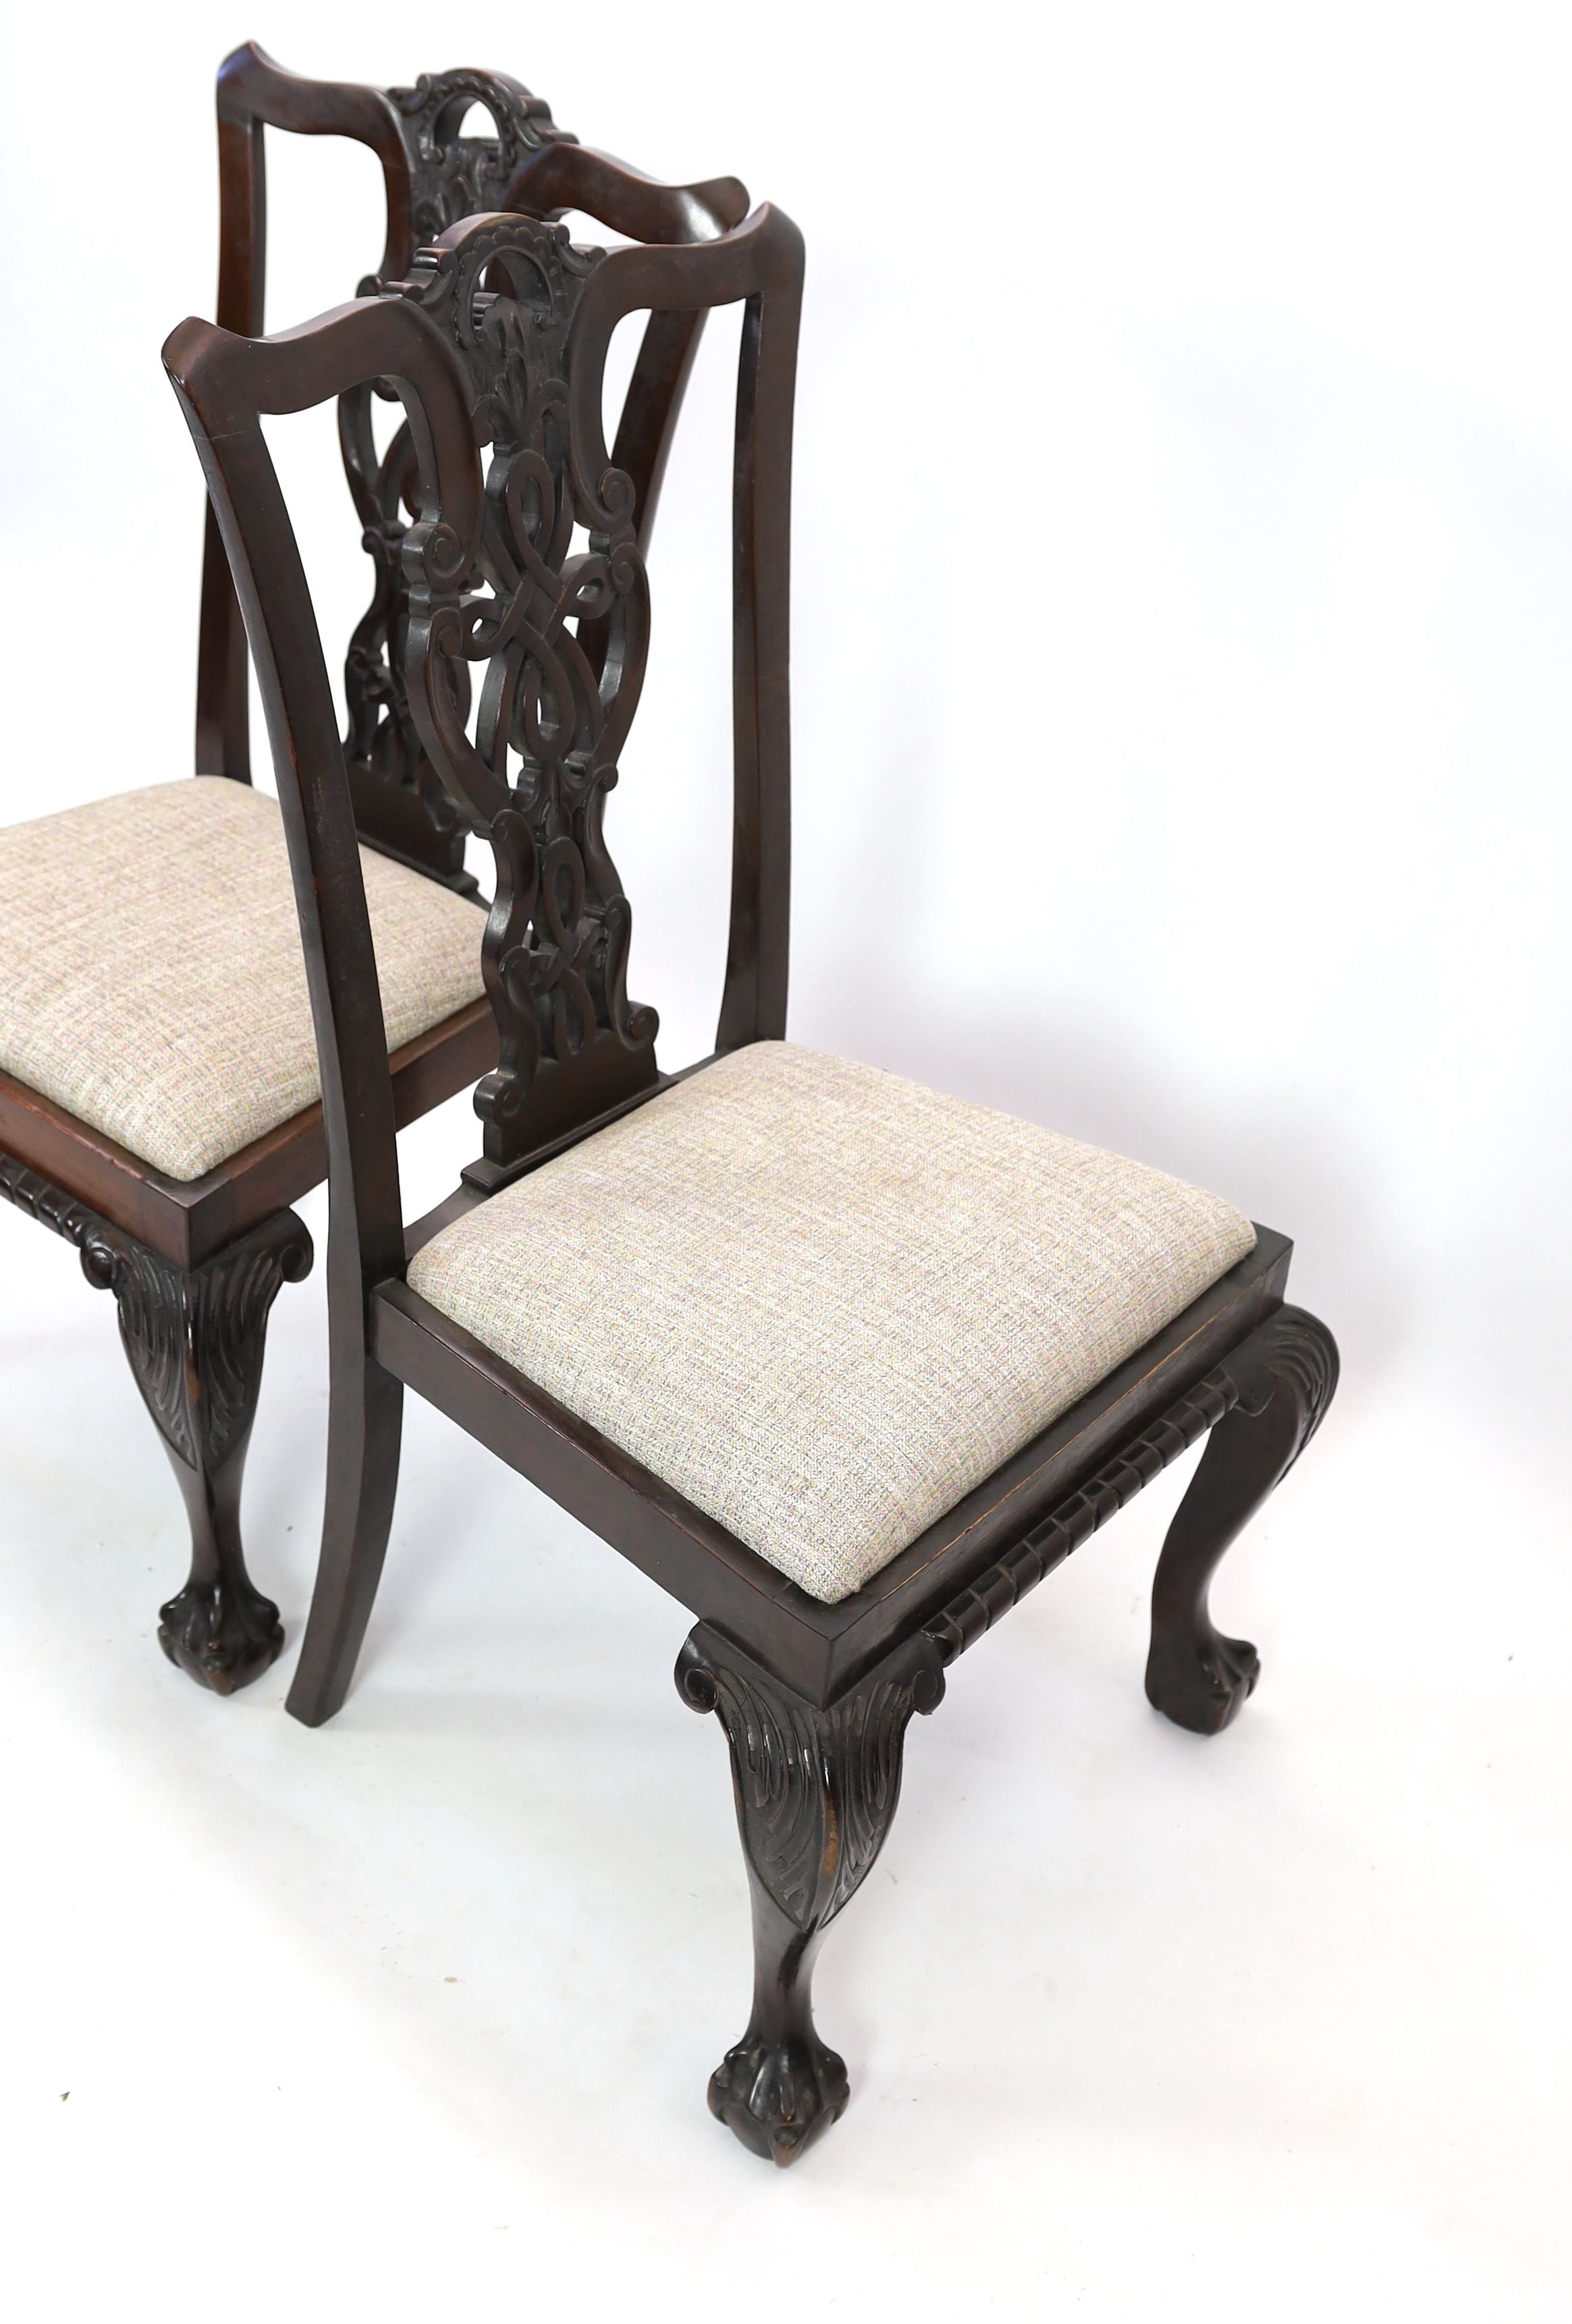 A pair of Chippendale revival mahogany dining chairs